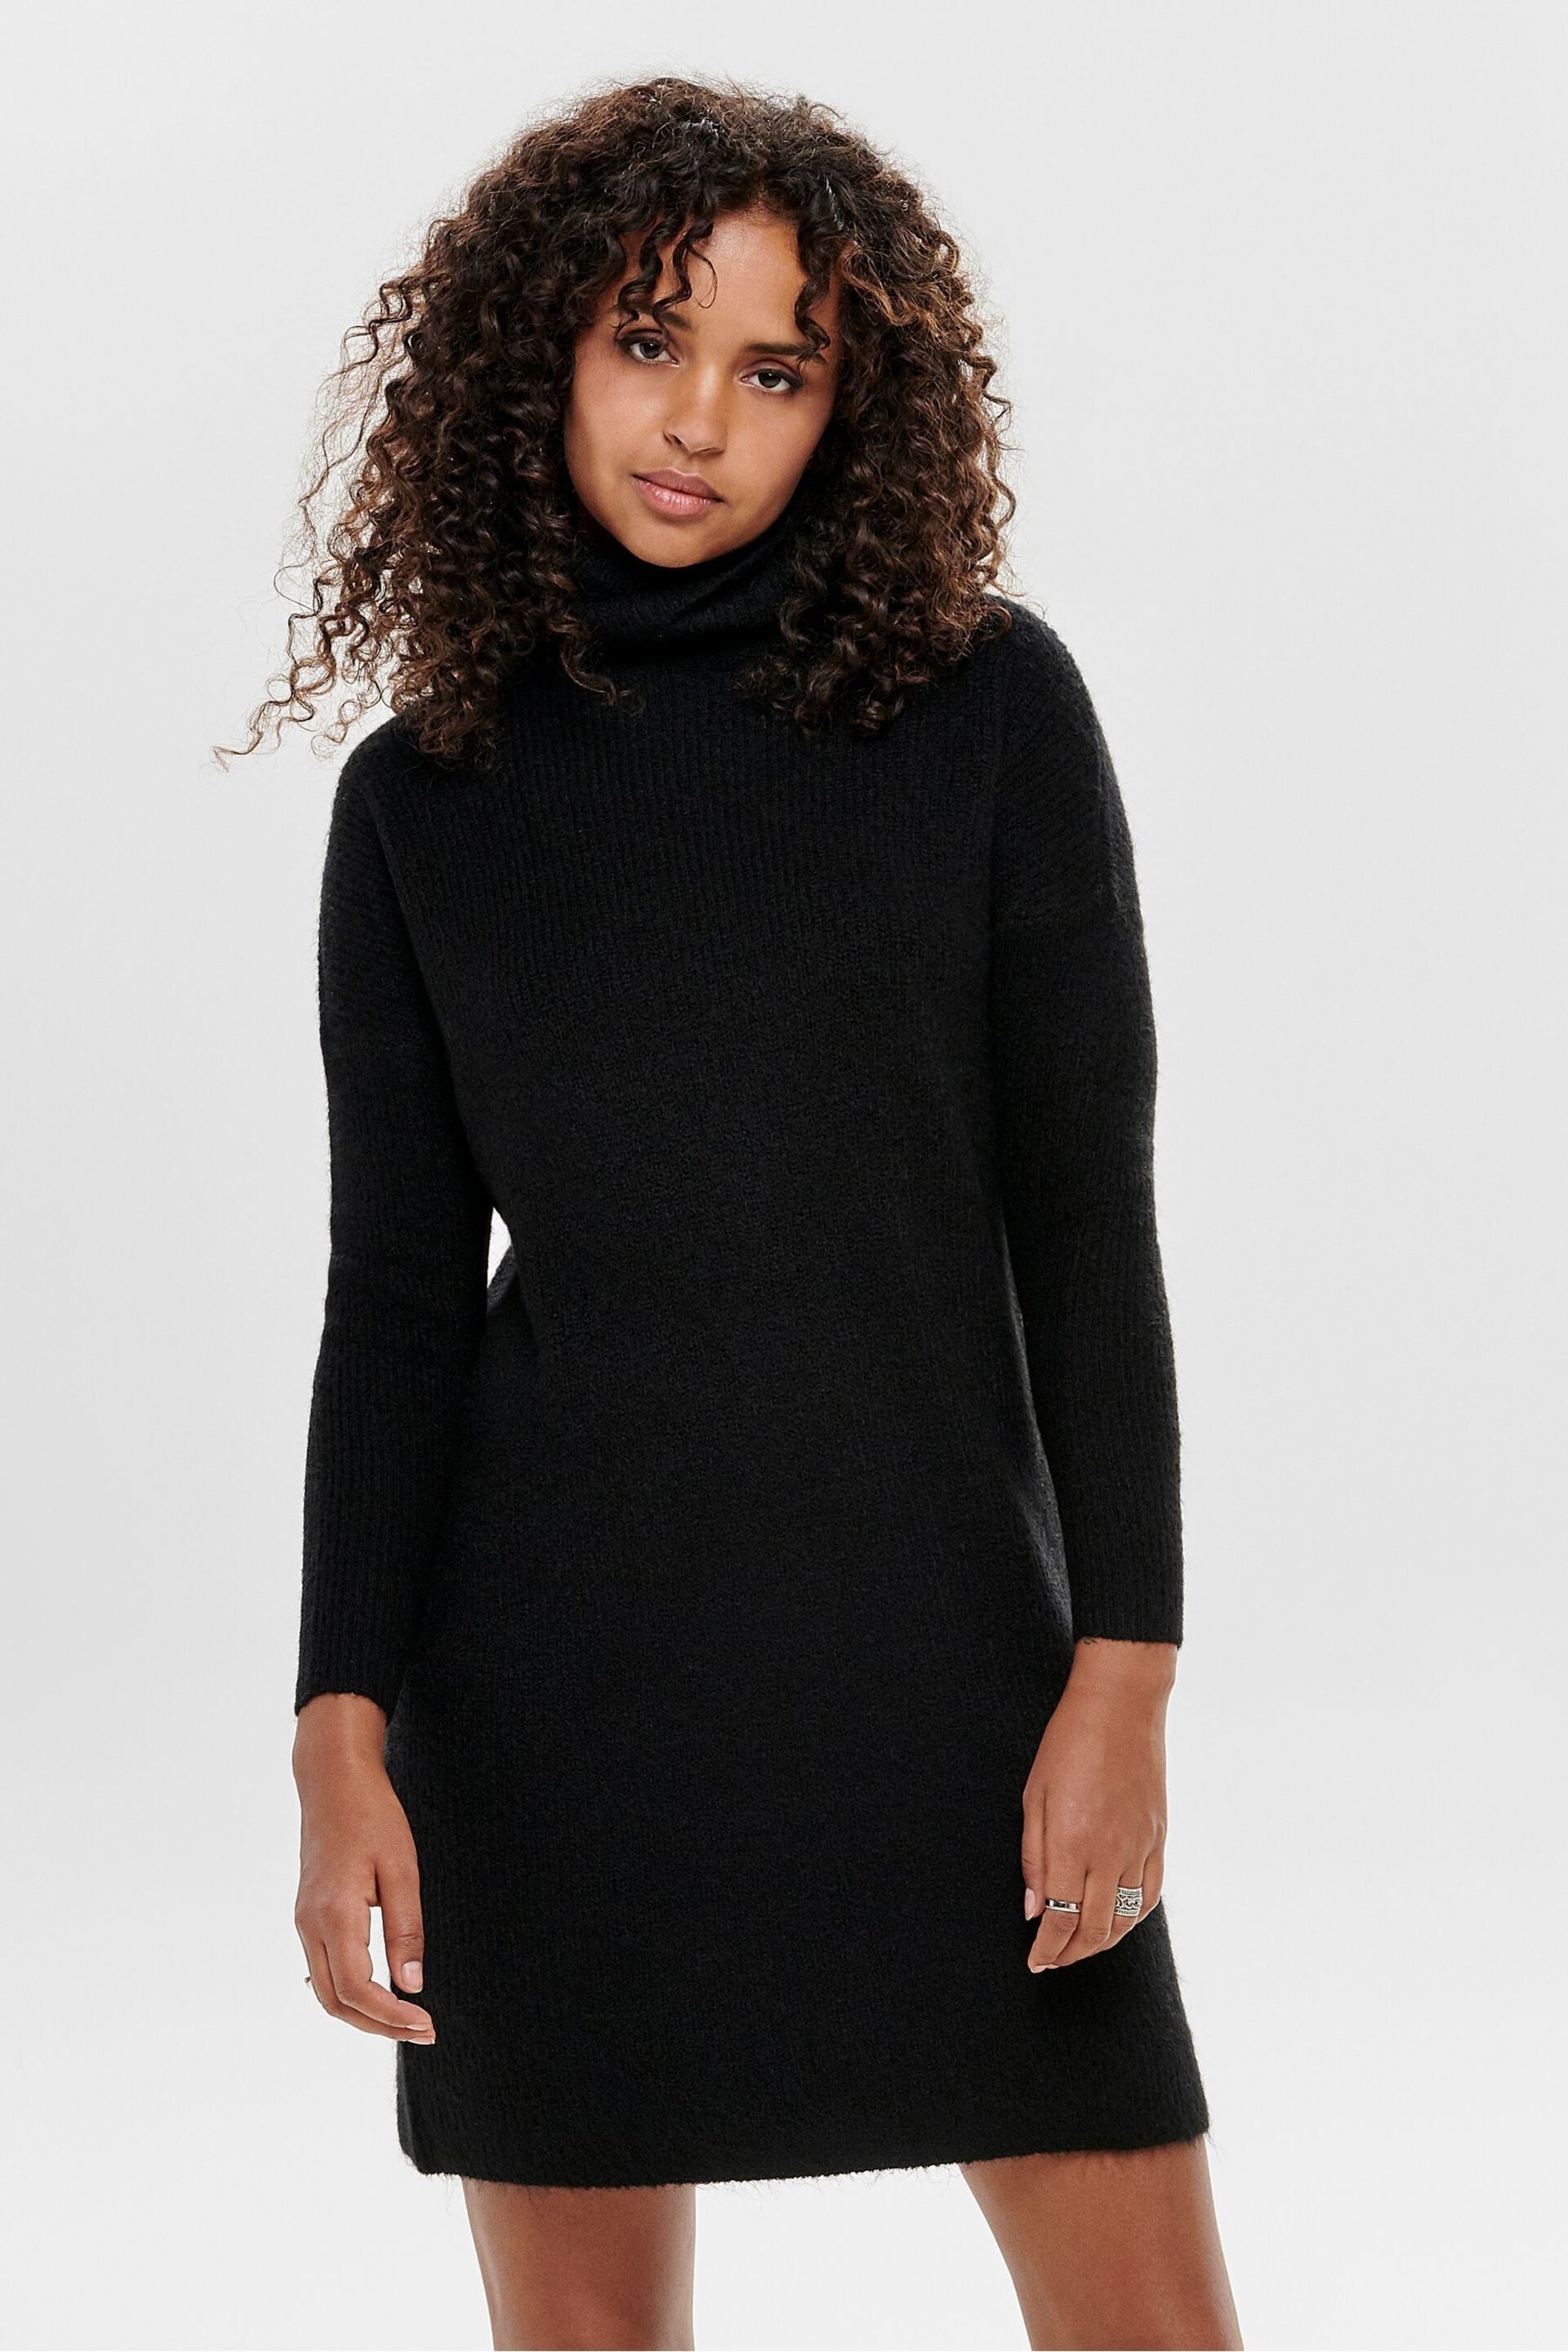 ONLY Black Roll Neck Knitted Jumper Dress - Image 1 of 2